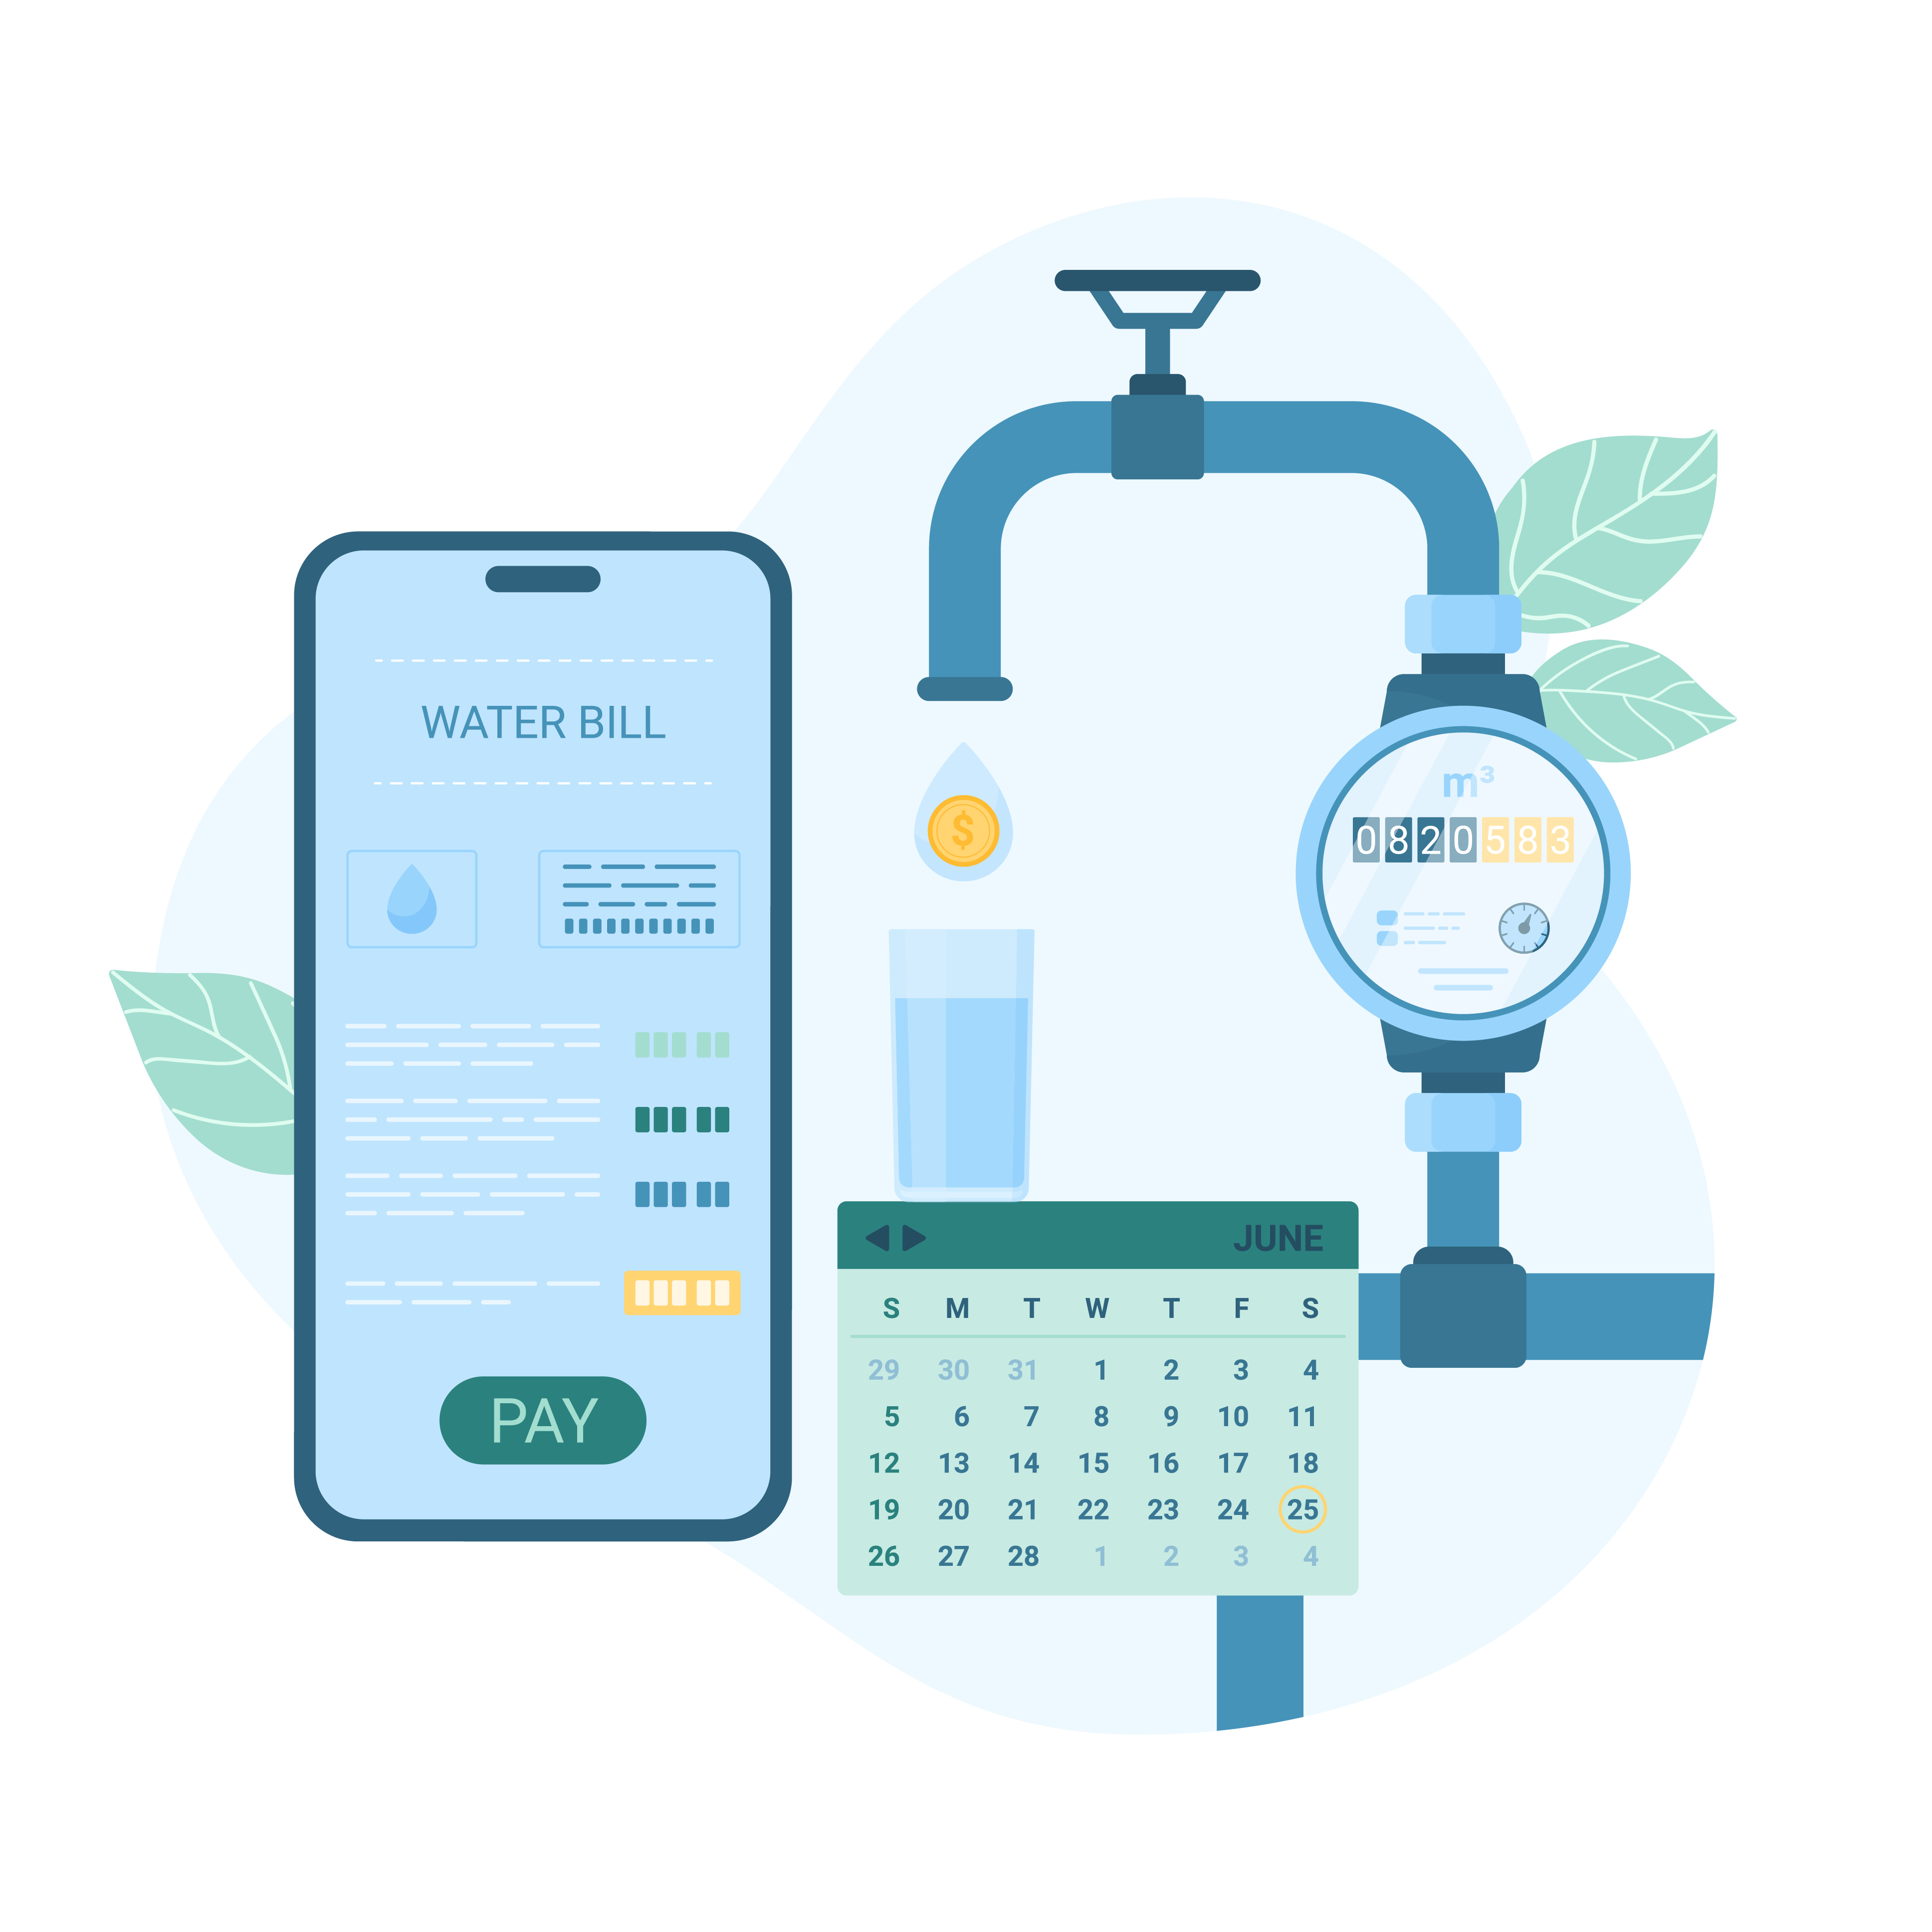 Empowering the water industry’s smart meter rollout